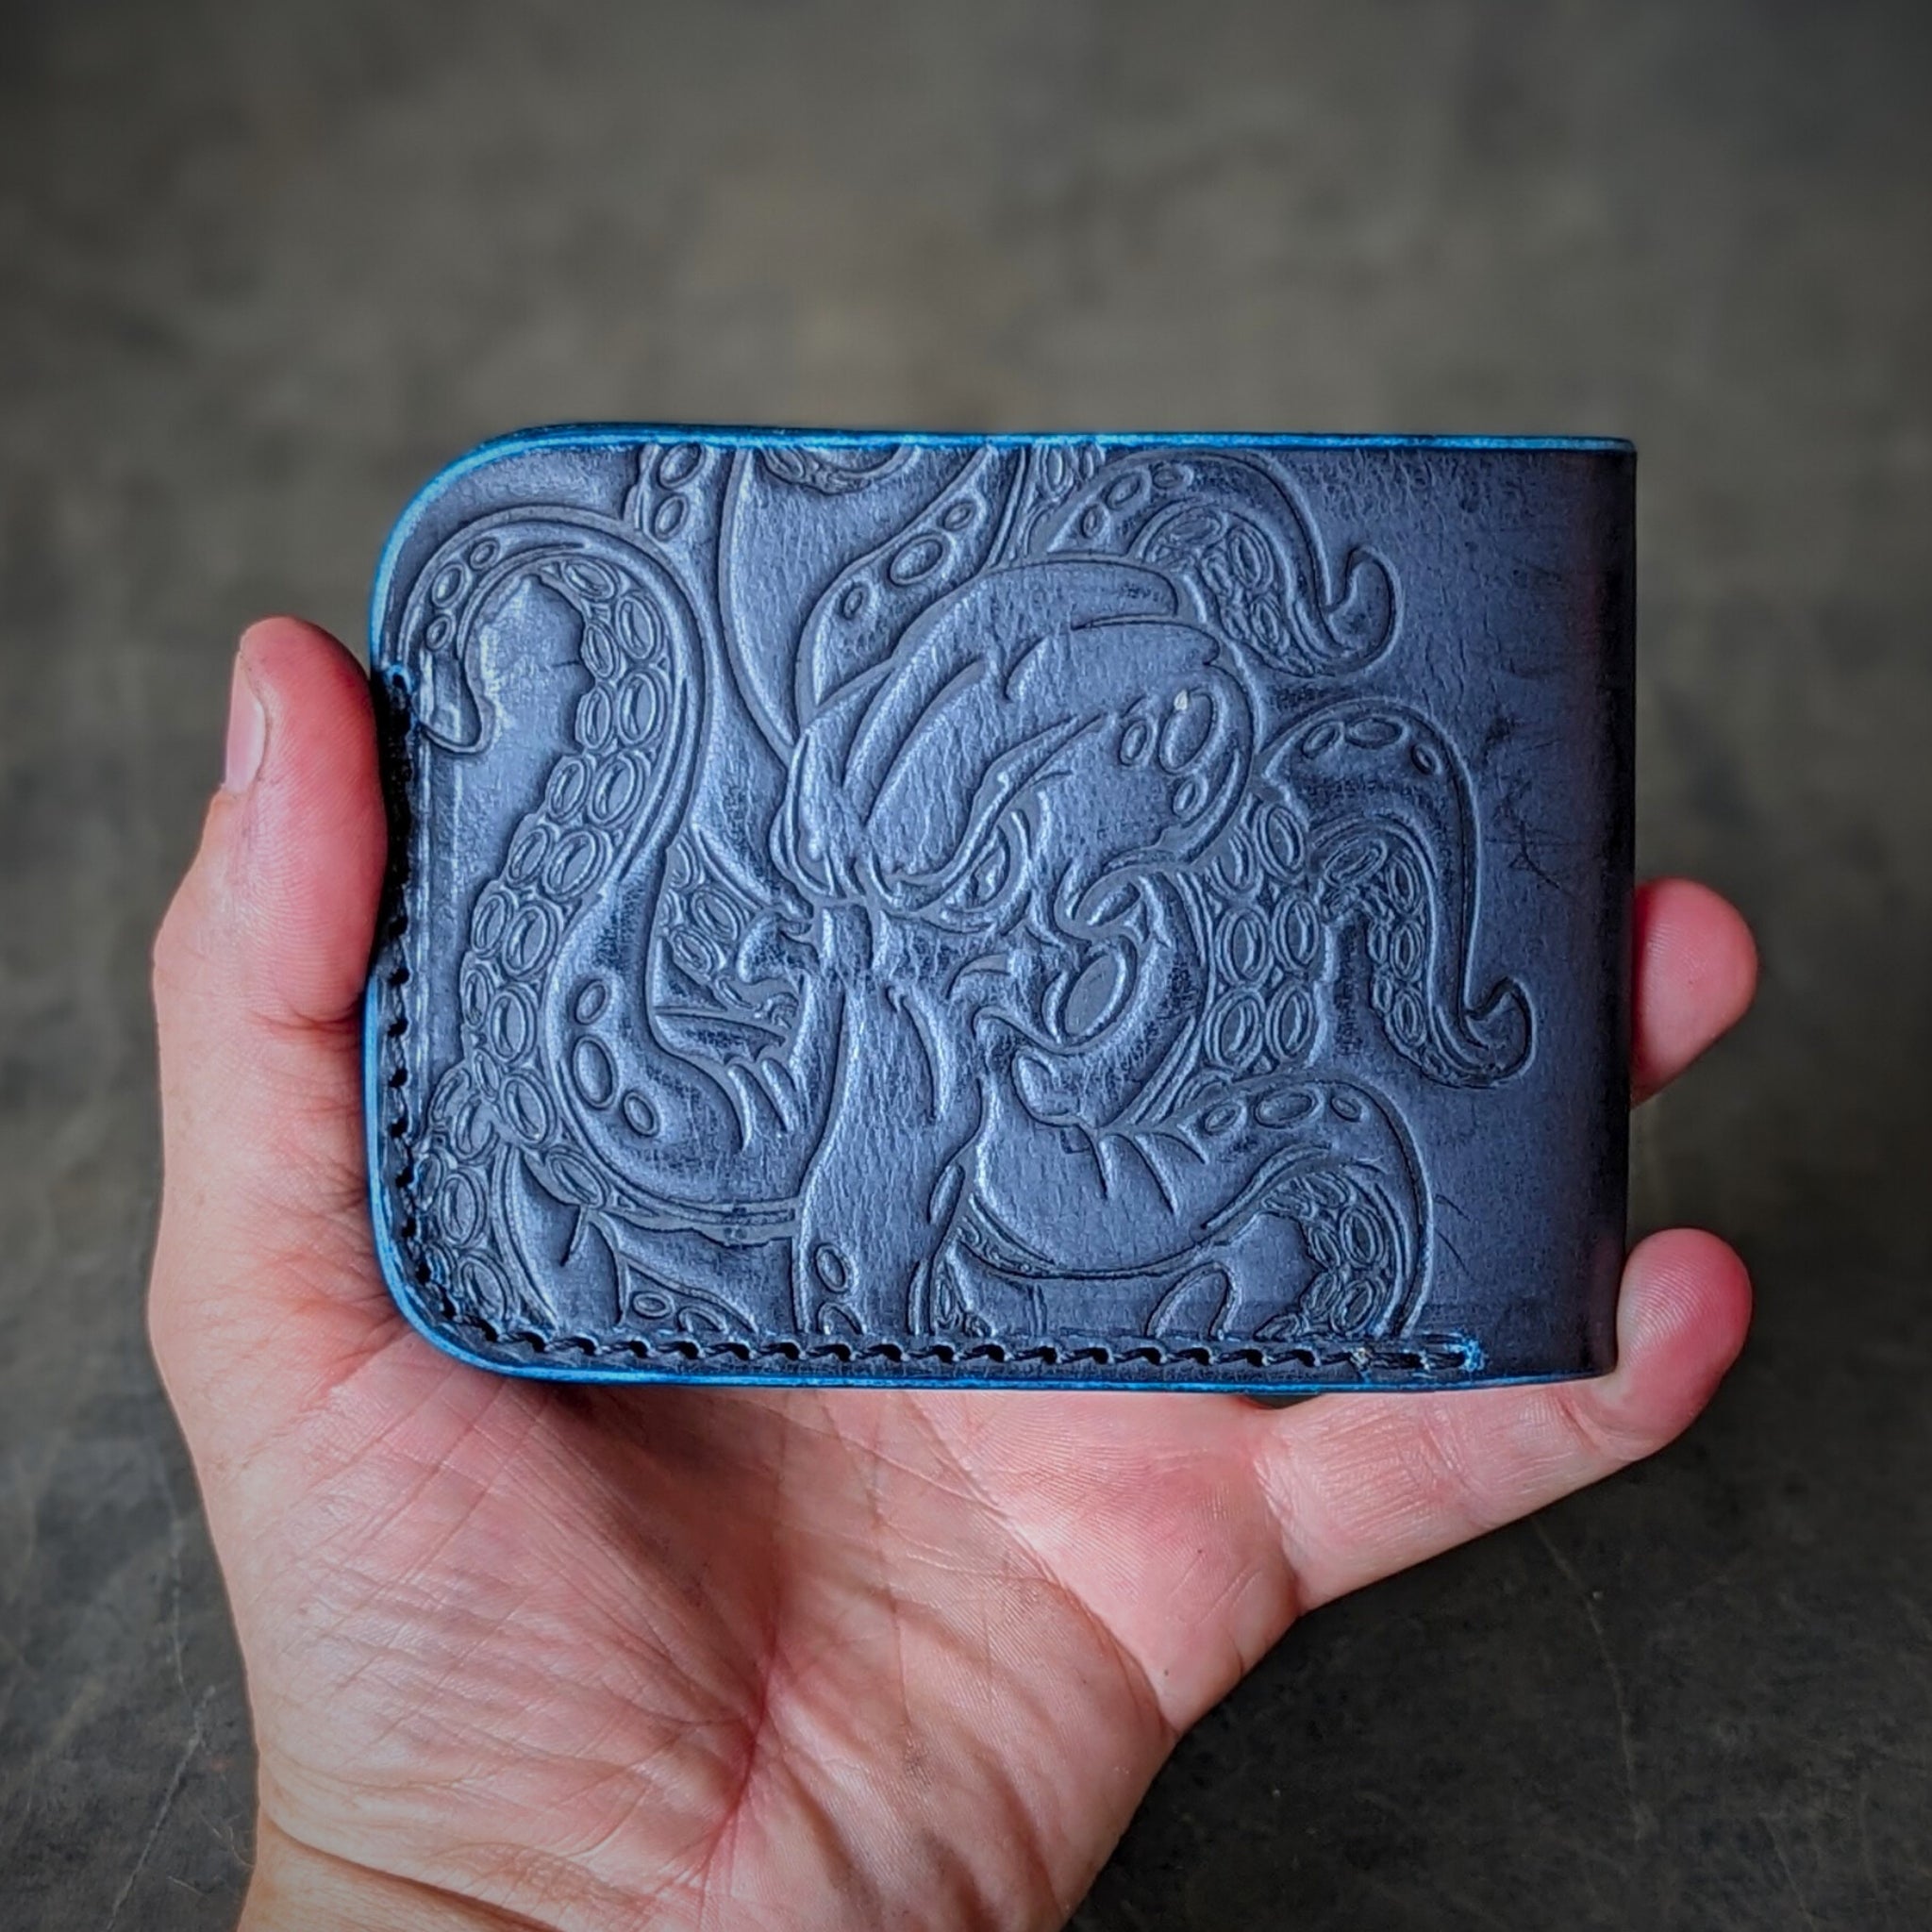 Bifold 2.0 Leather Wallet - Blue Ghost Octopus